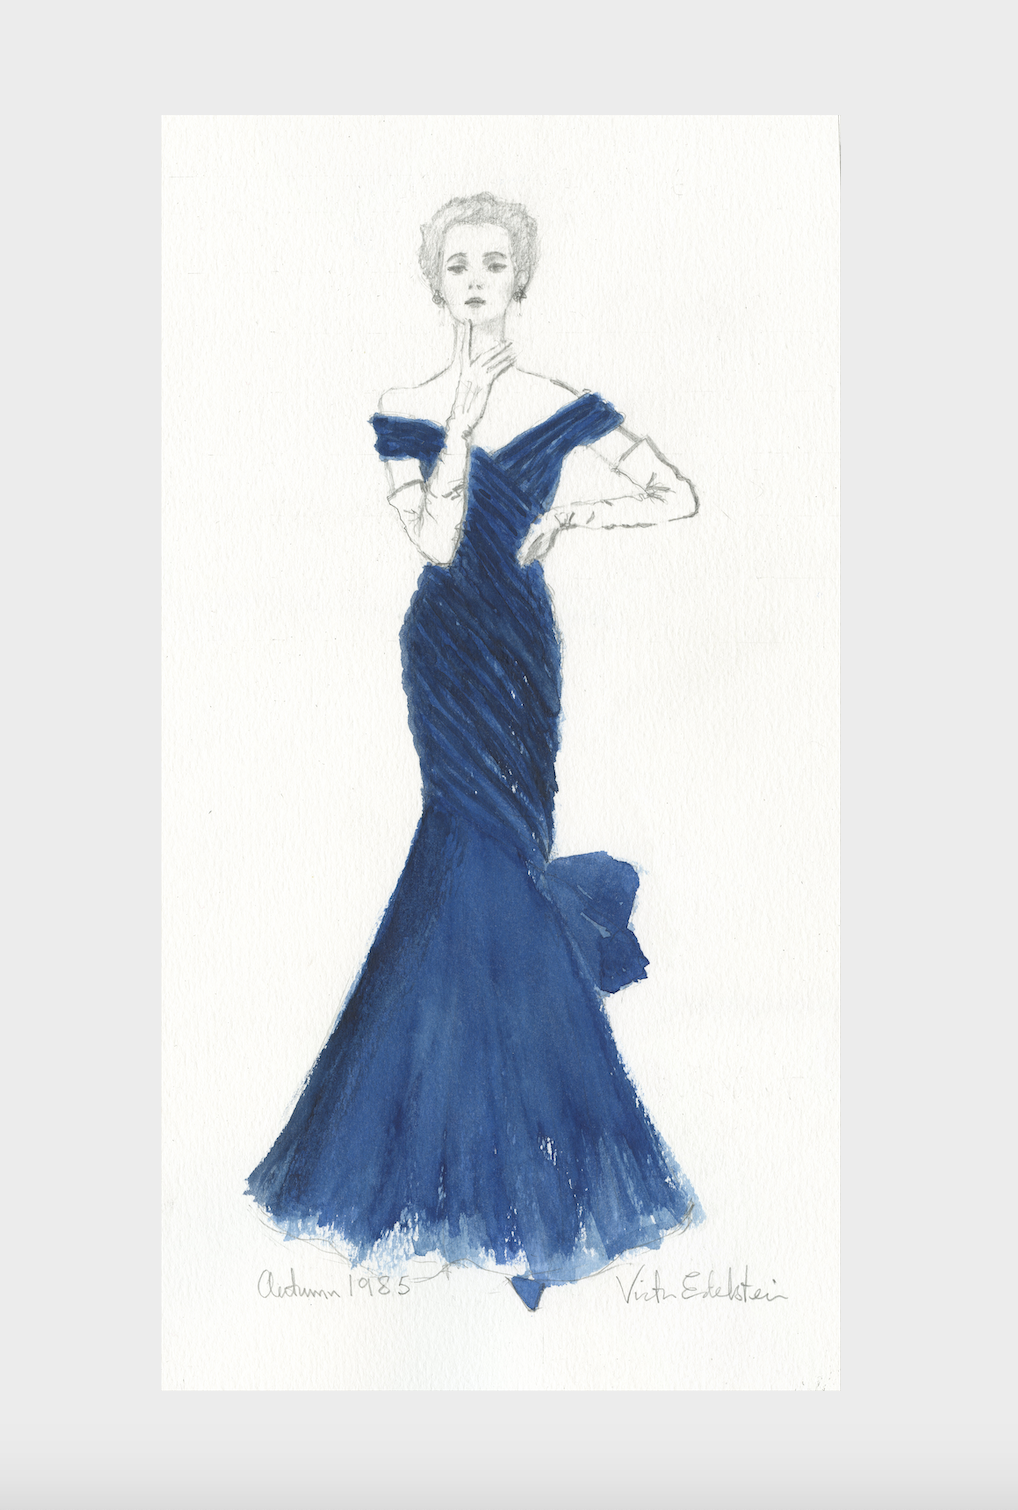 Designer unveils sketches for new Disney princess-inspired gown collection  - ABC7 New York